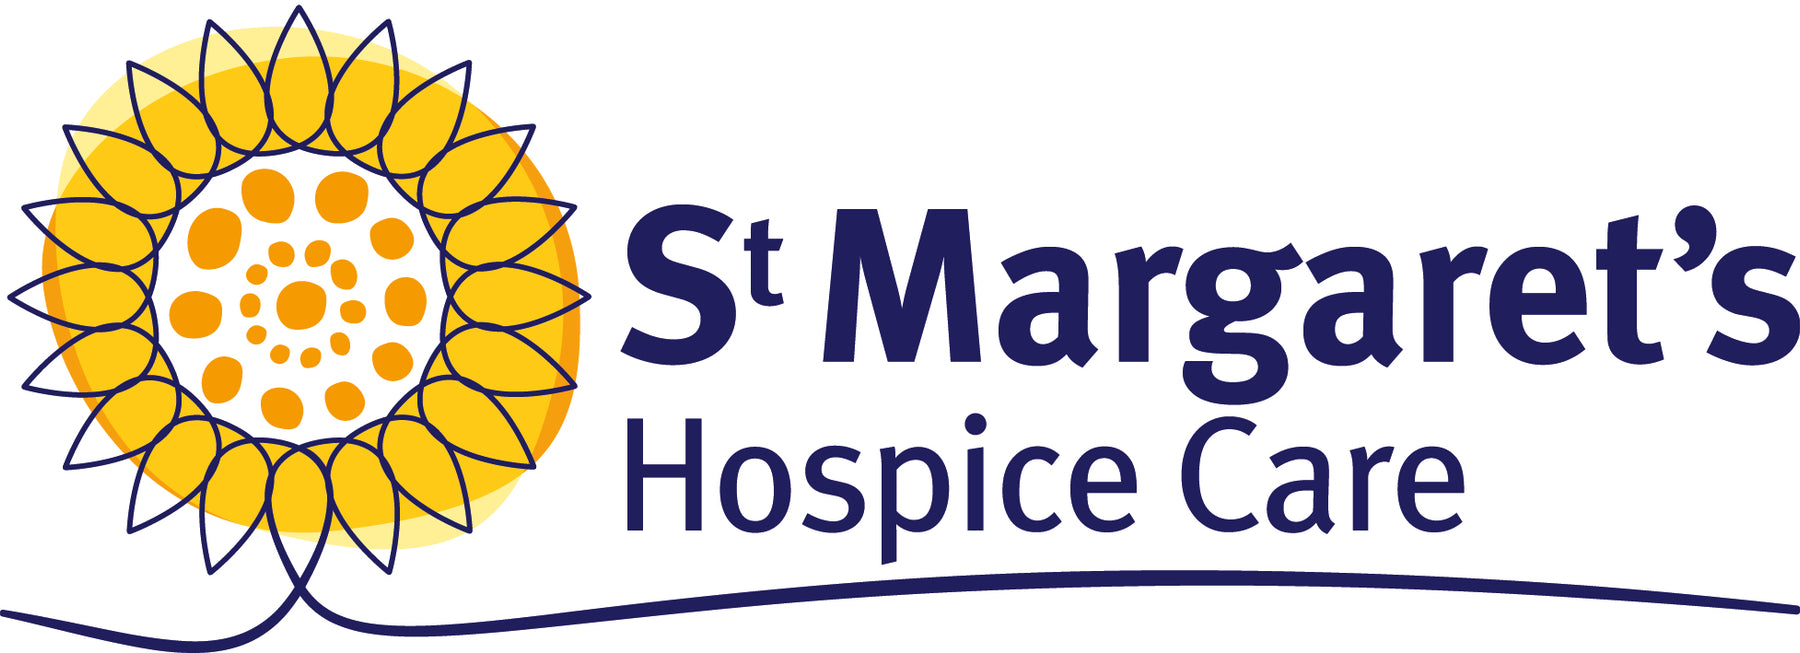 CPW Supports St Margaret's Hospice Care Through 2023